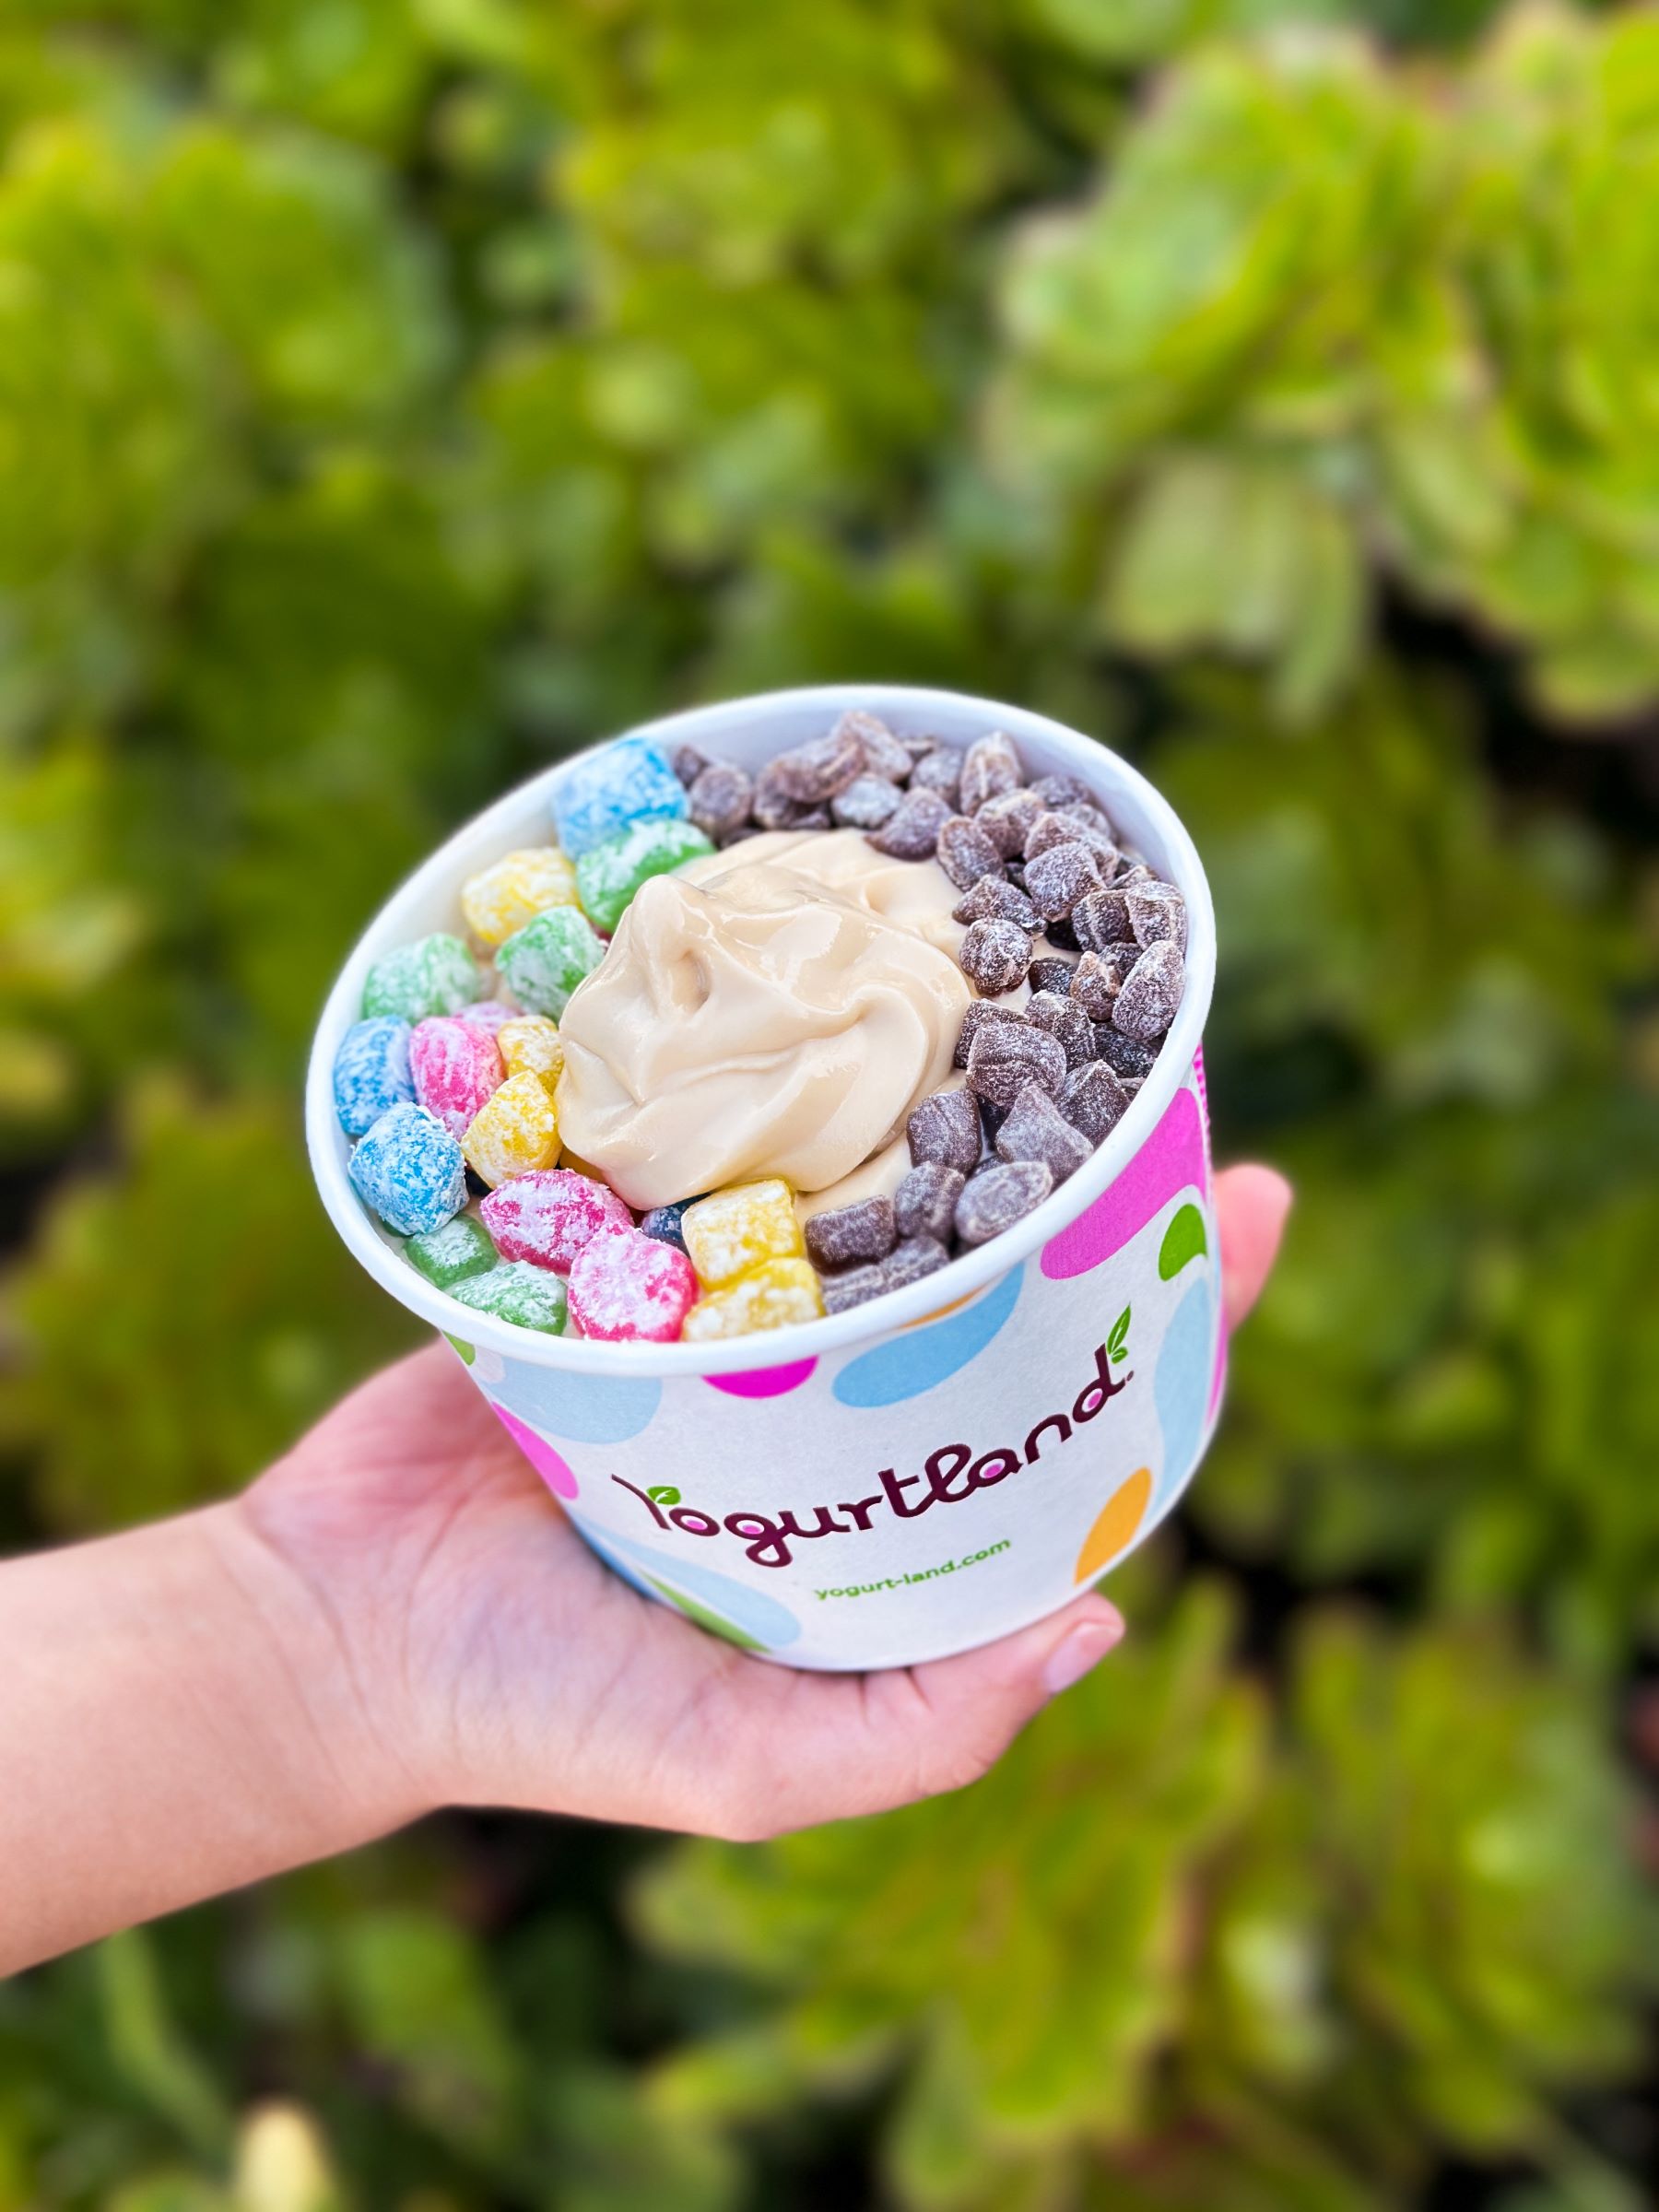 An image of someone holding a cup of Yogurtland froyo